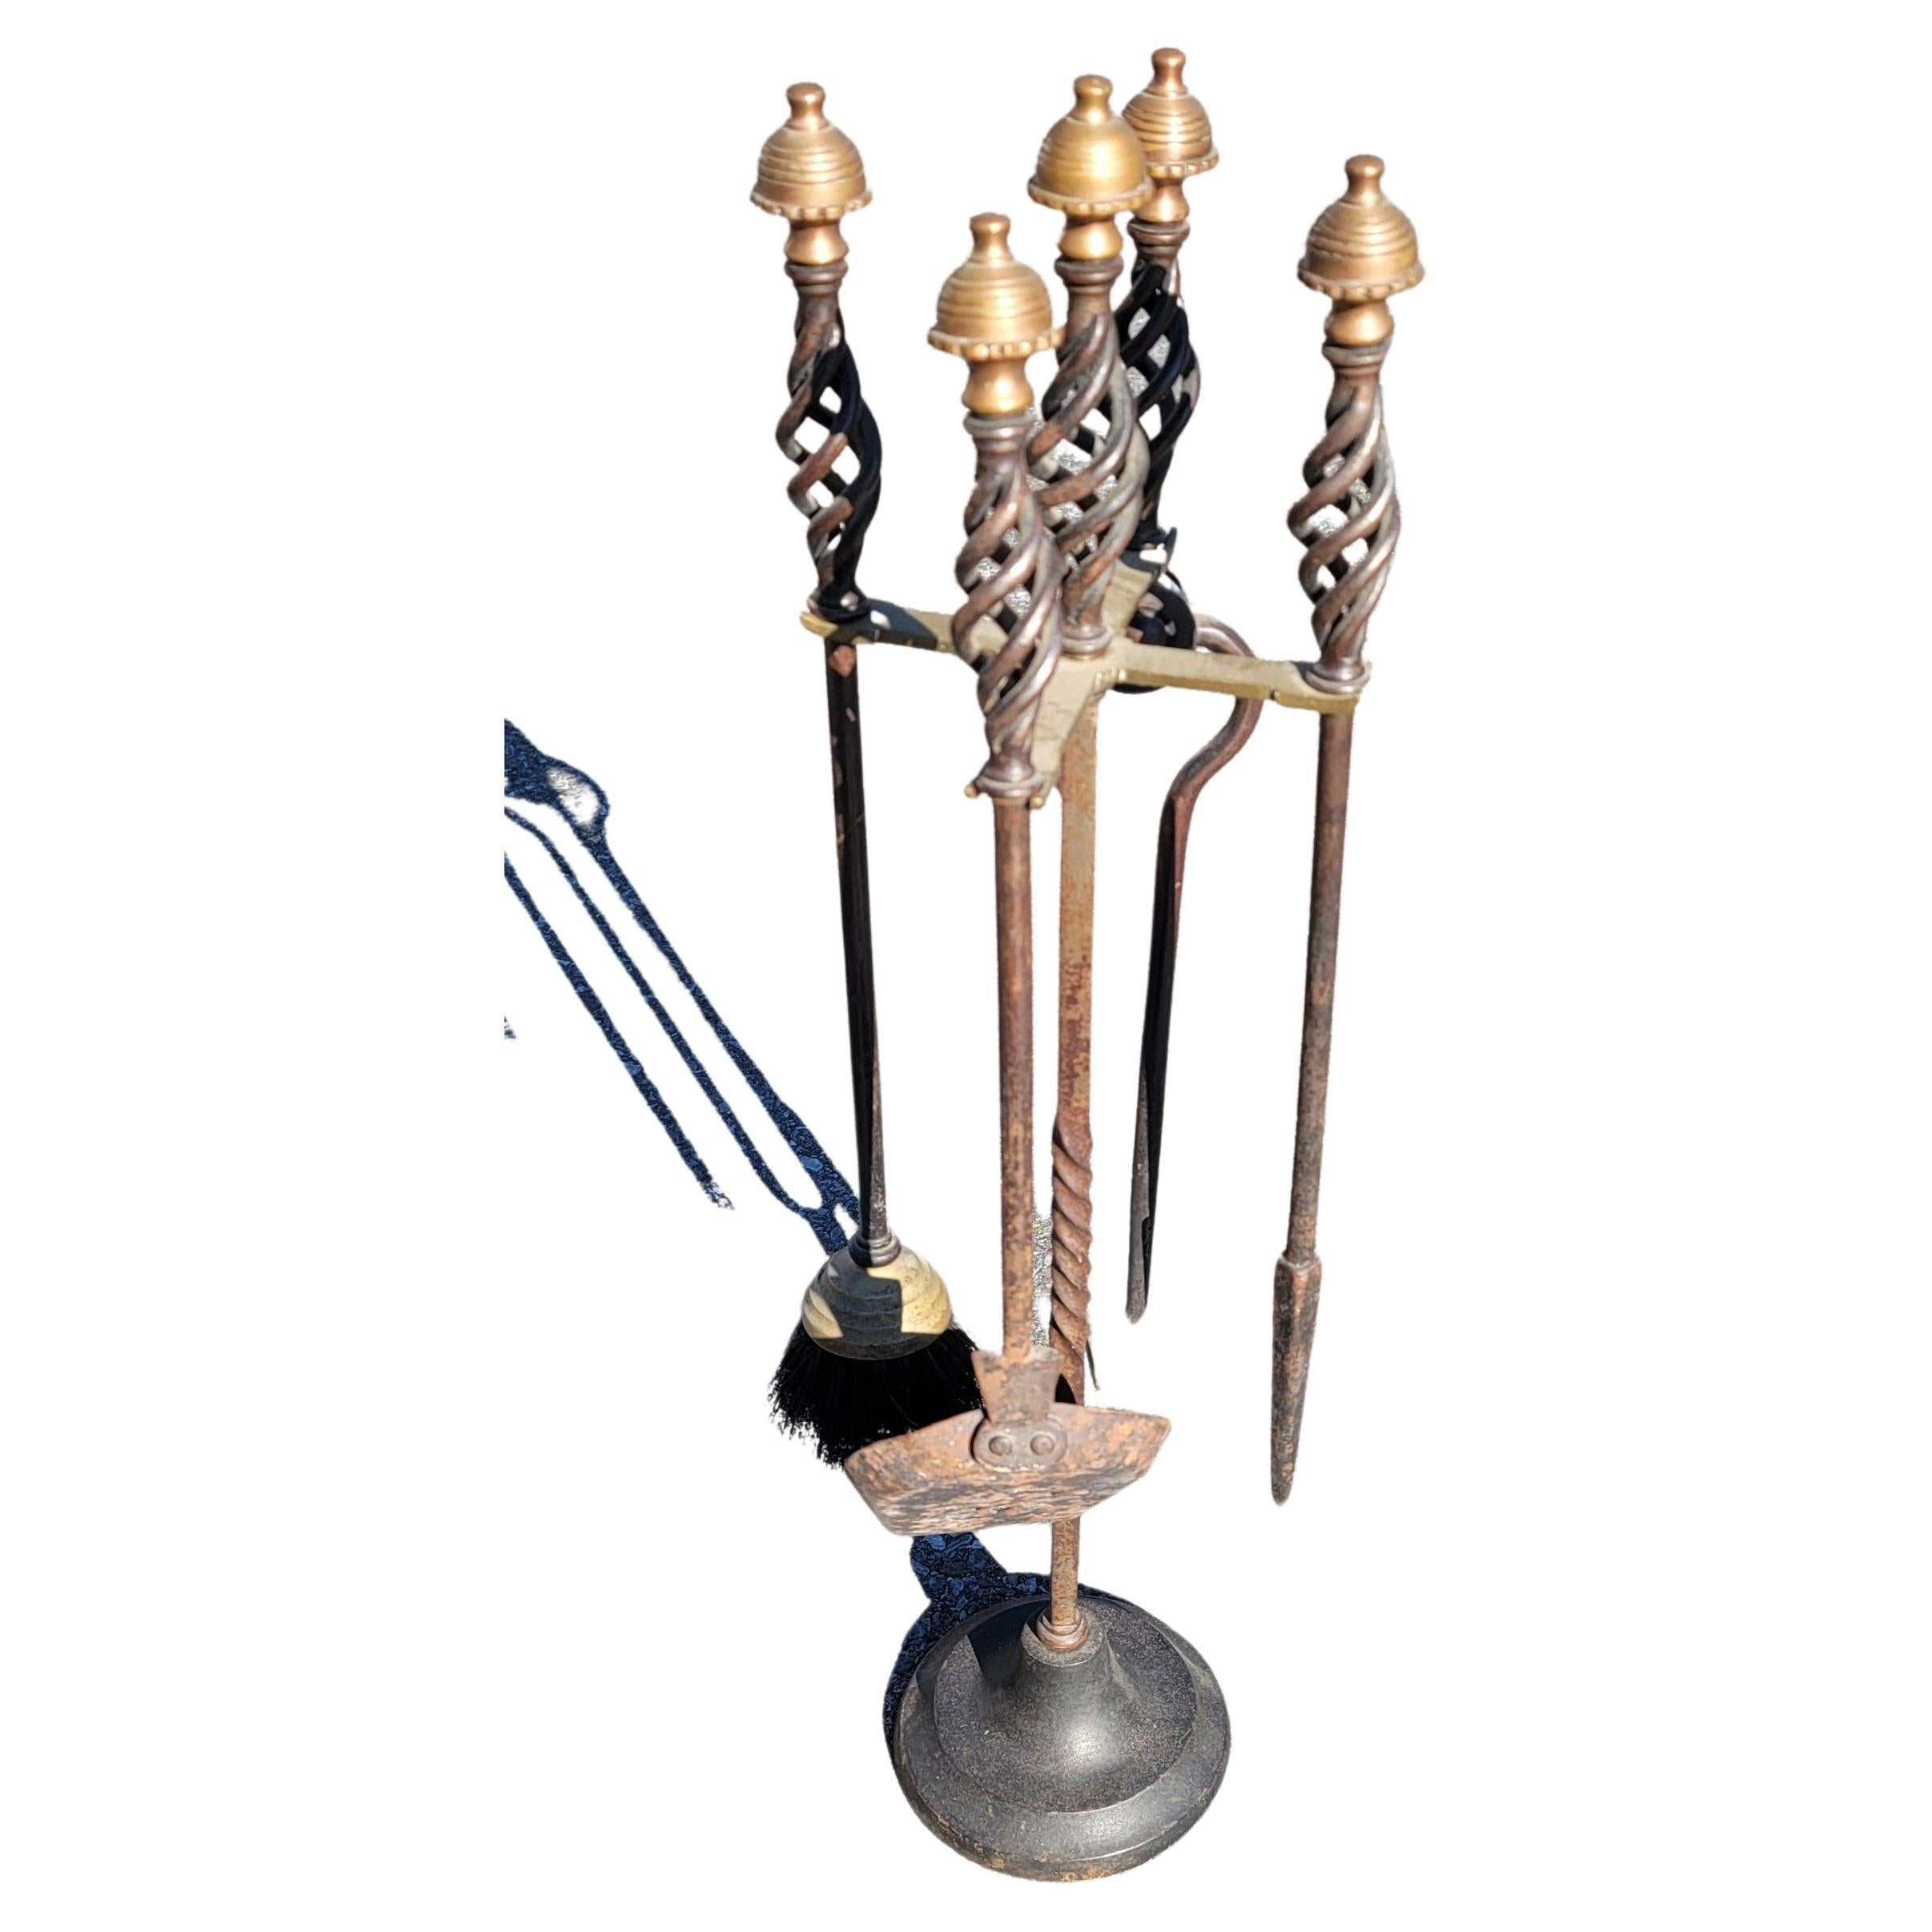 Set of 5 American Art Deco brass mushroom heads and iron fireplace tools with stand.
Mreasures 7